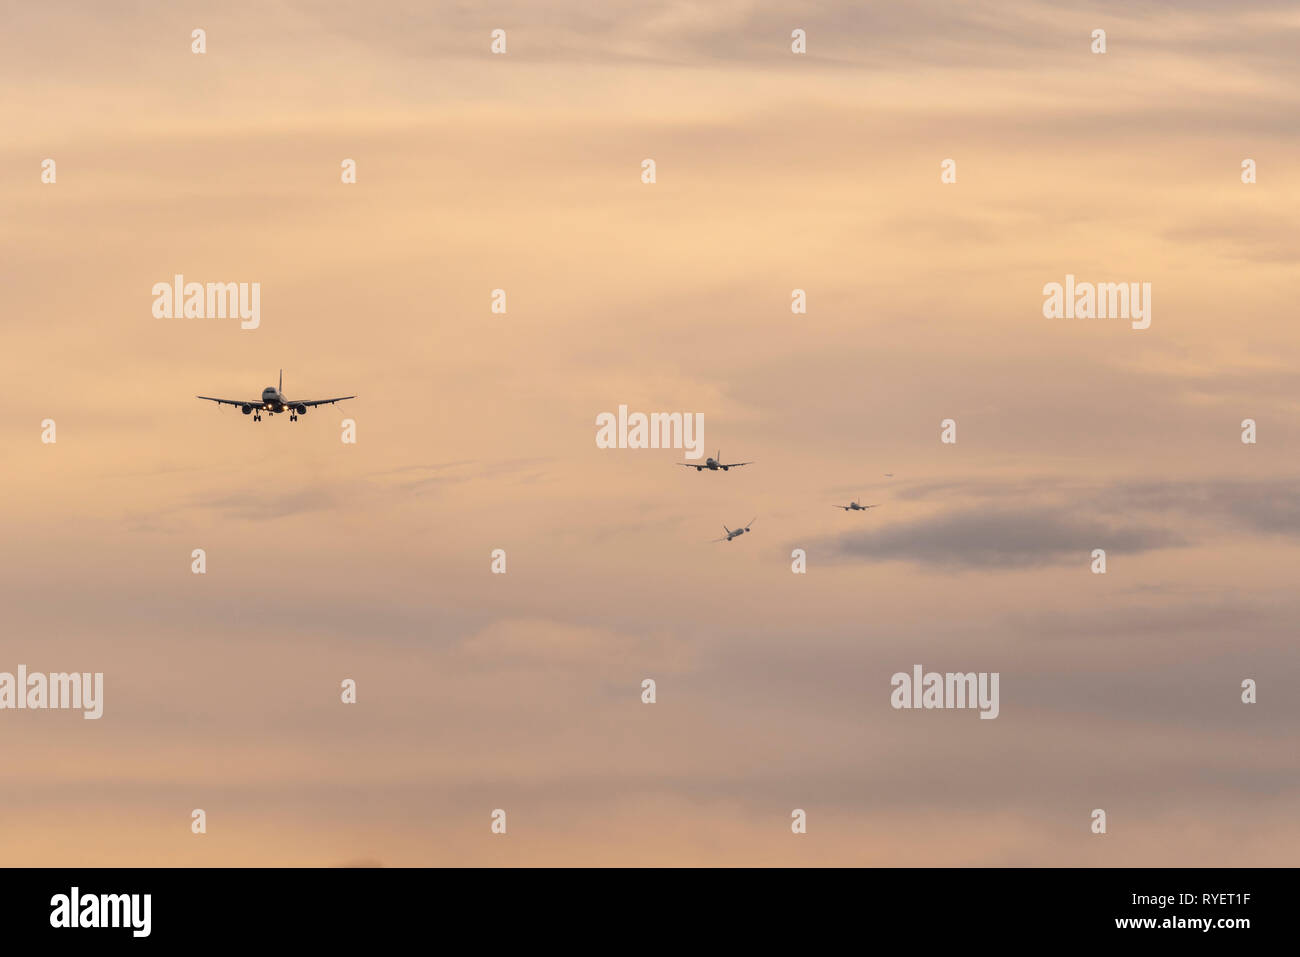 Queue of planes on final approach to land at London Heathrow Airport, London, UK at dawn. Landing airliners. Busy finals for landing at airport Stock Photo